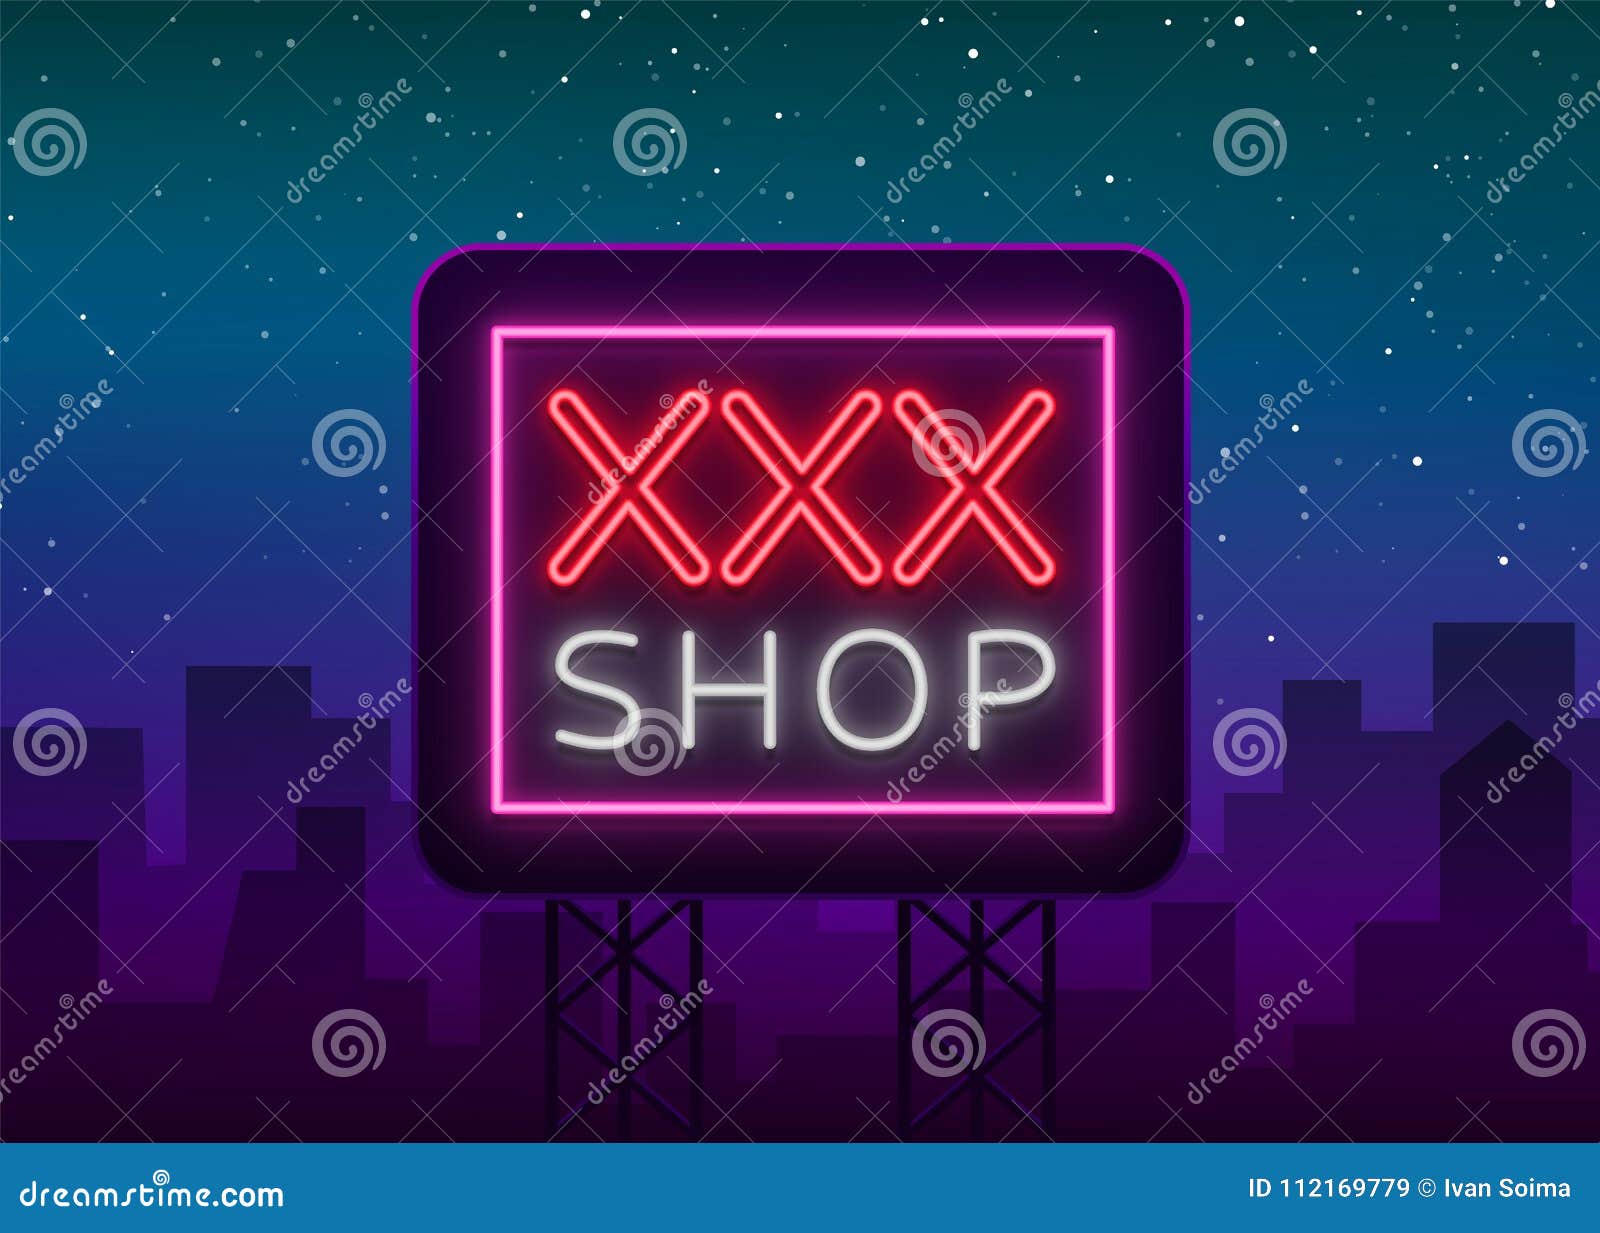 Sex Pattern Logo Xxx Concept For Adults In Neon Style Neon Sign Design Element Storage